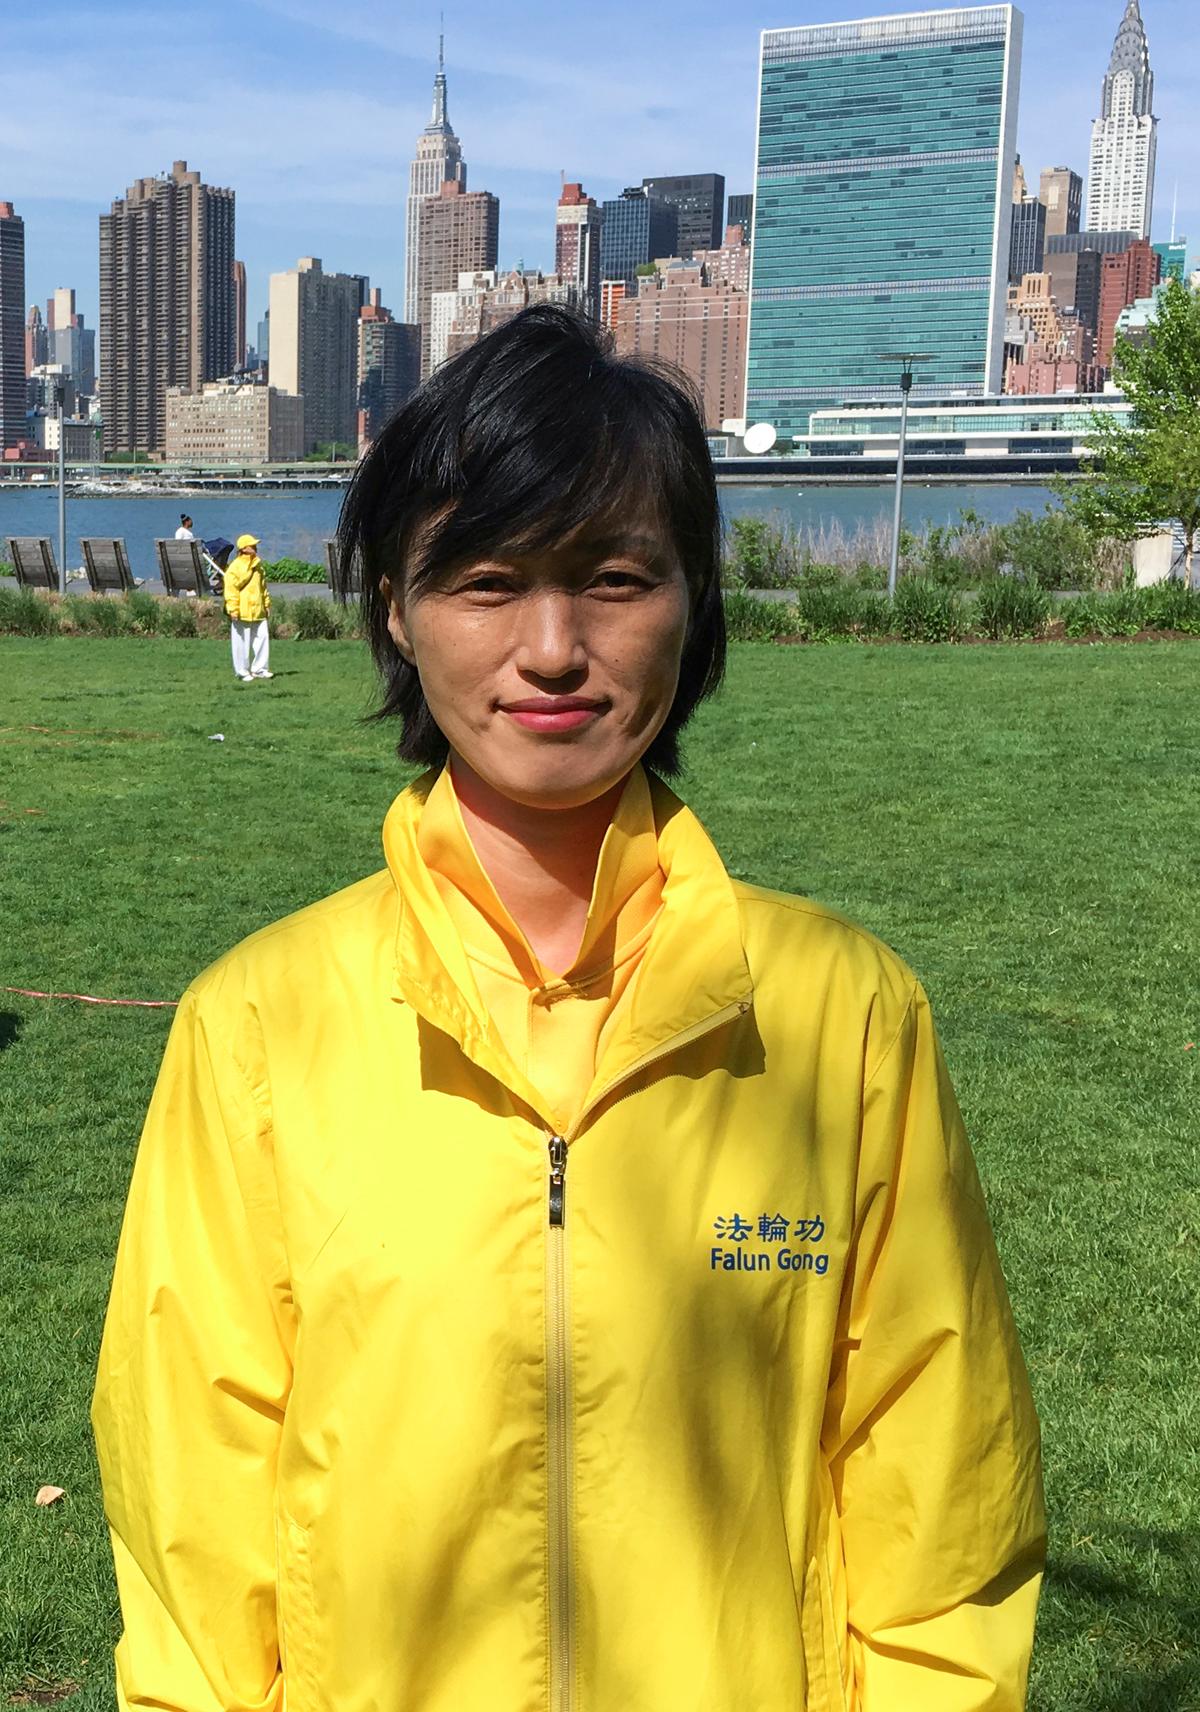 Choi Kyung-soon, a Falun Gong practitioner from South Korea, joins a character formation event at Gantry Plaza State Park on May 12, 2016. (Larry Ong/Epoch Times)